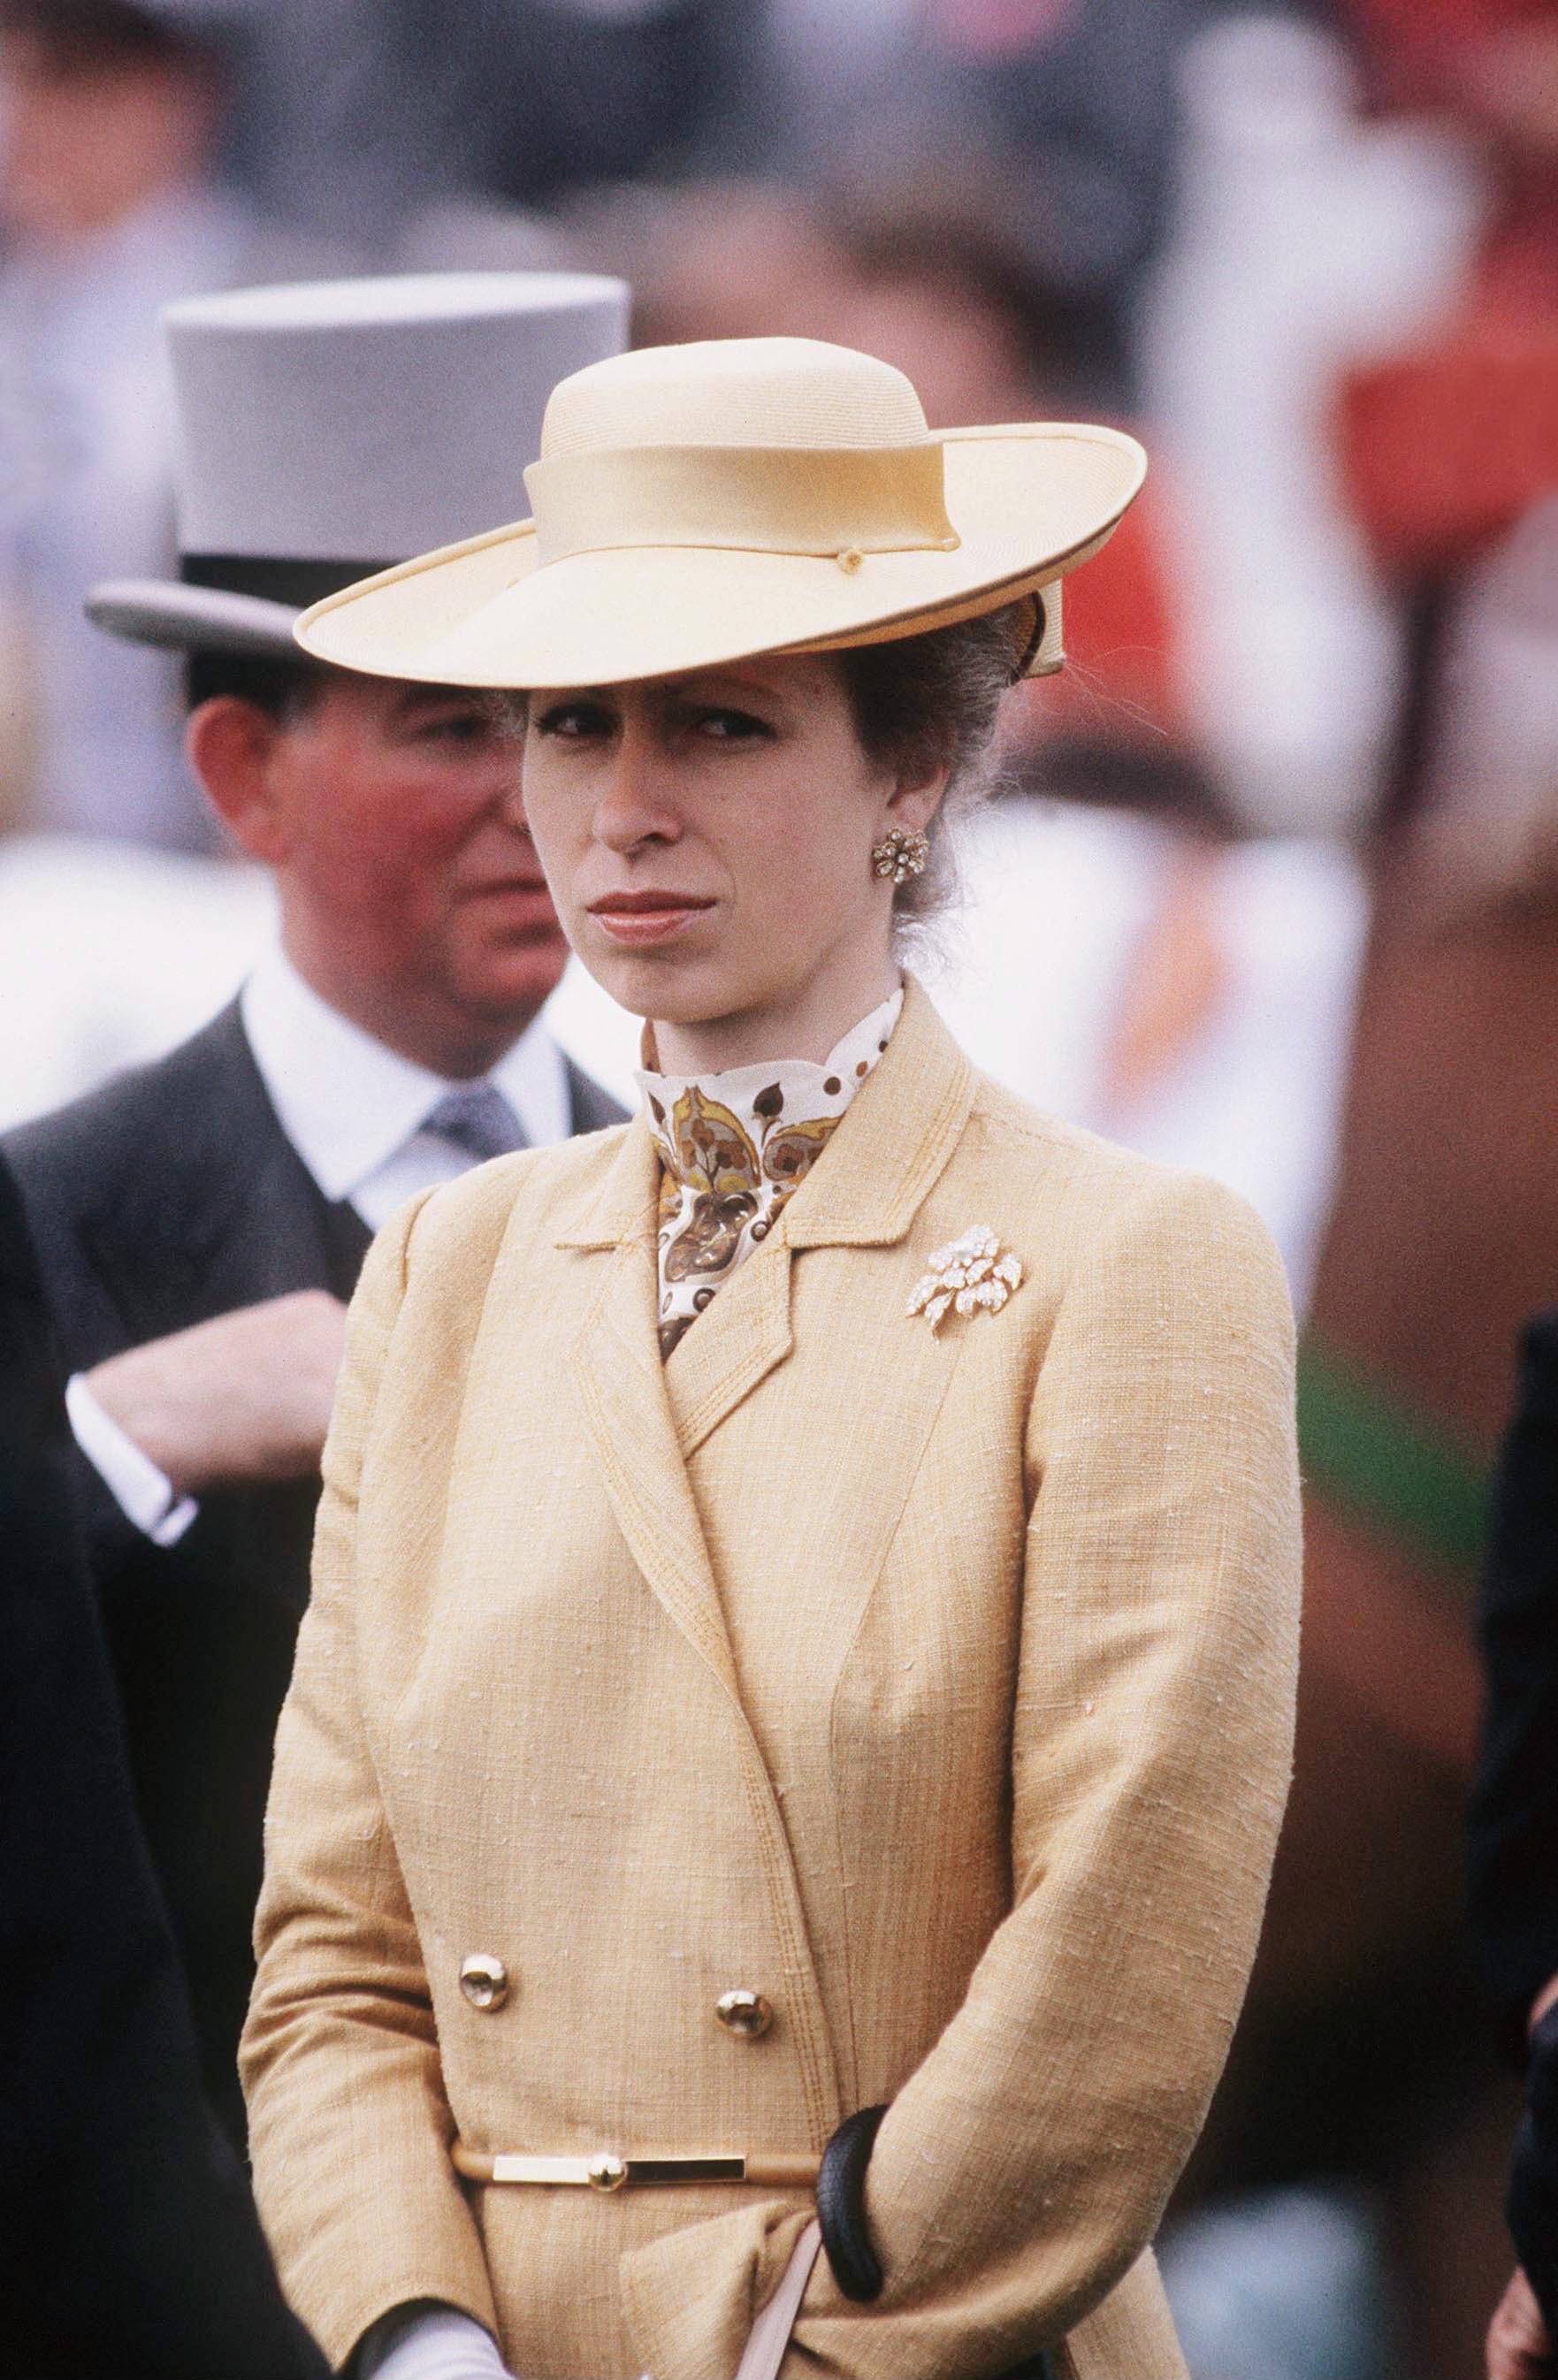 Princess Anne in Epsom UK 1983. | Source: Getty Images